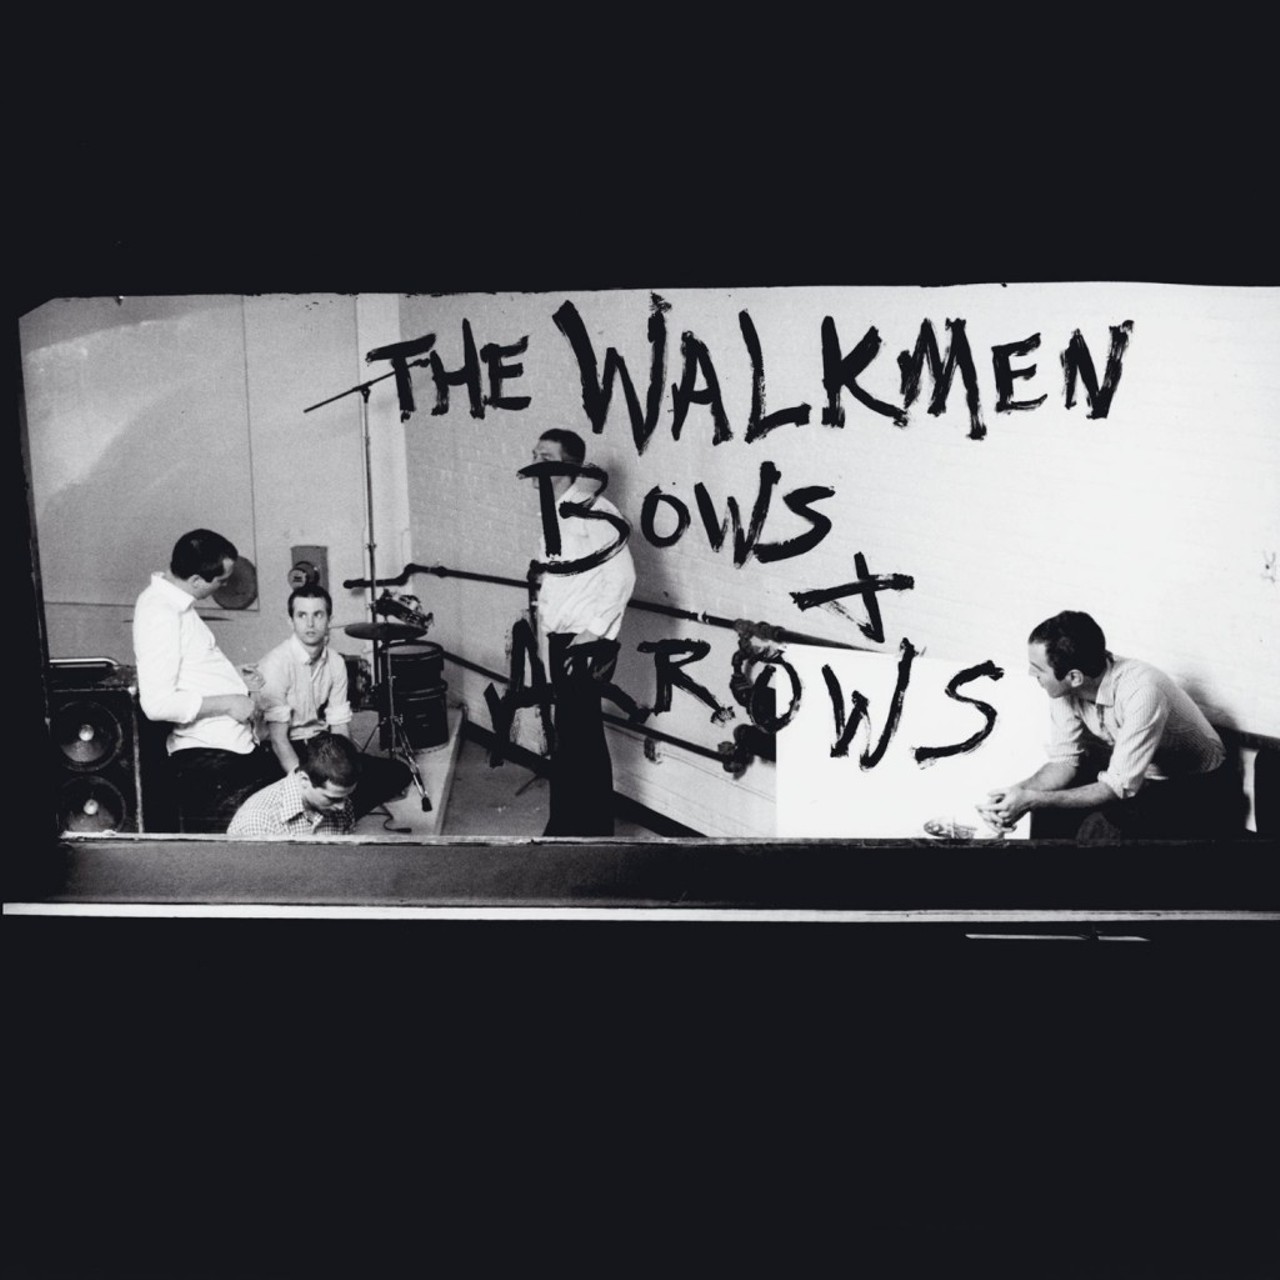 The Walkmen - Bows + Arrows
An indie rock classic. The jingle-jangle slightly distorted reverb of the guitars and the keys have become a staple of the New York group&#146;s sound, often imitated, never duplicated. 
Via alanbumstead.wordpress.com